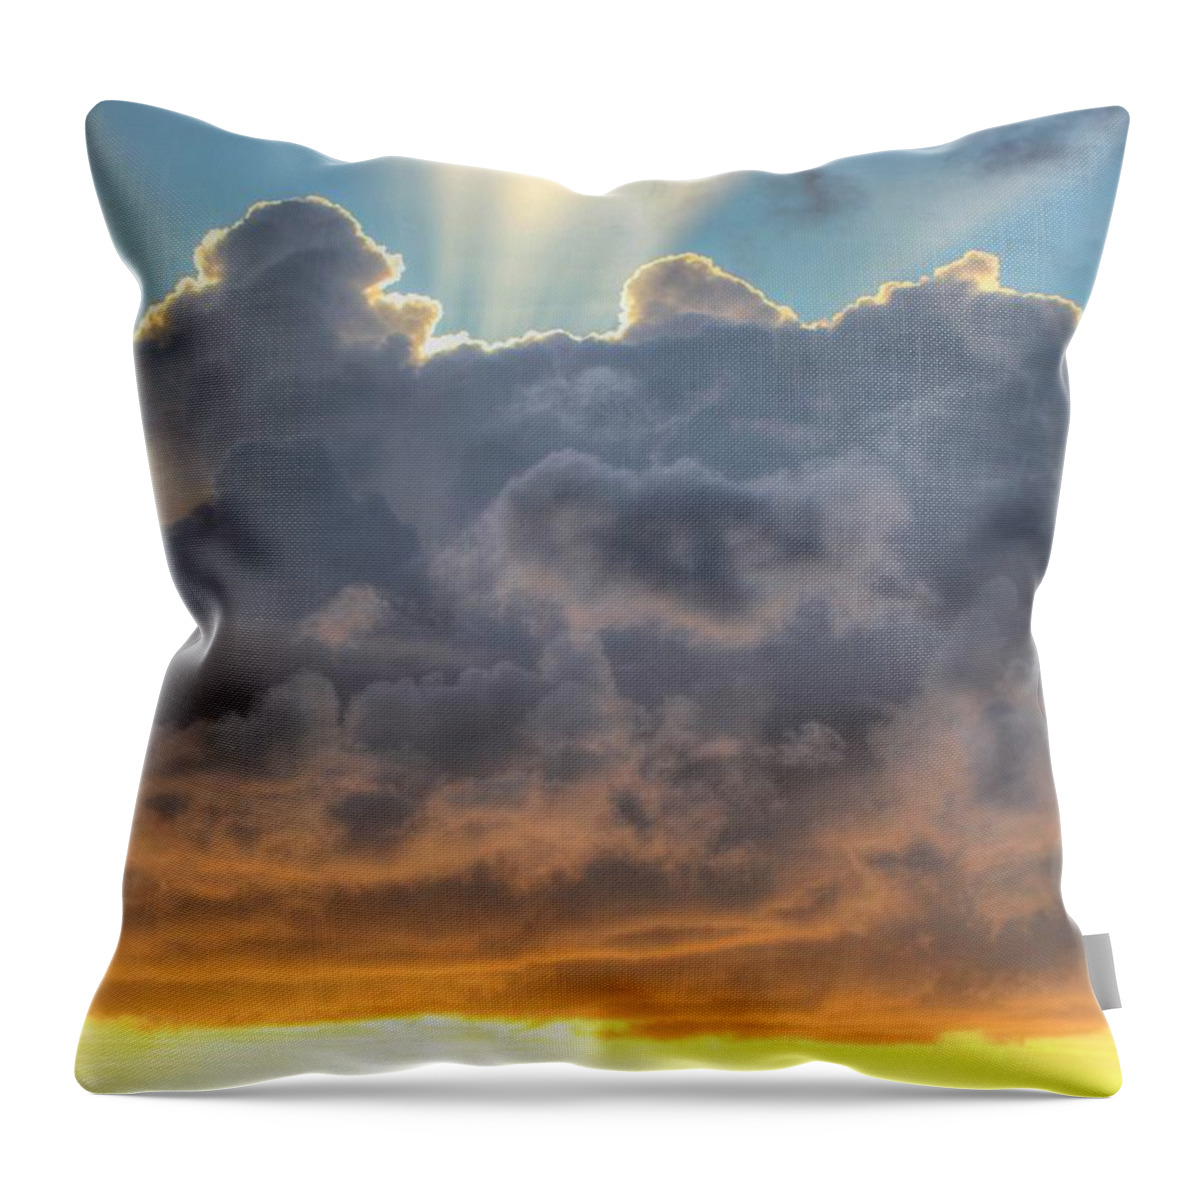 Rays Throw Pillow featuring the photograph Celestial Rays by Shelley Neff